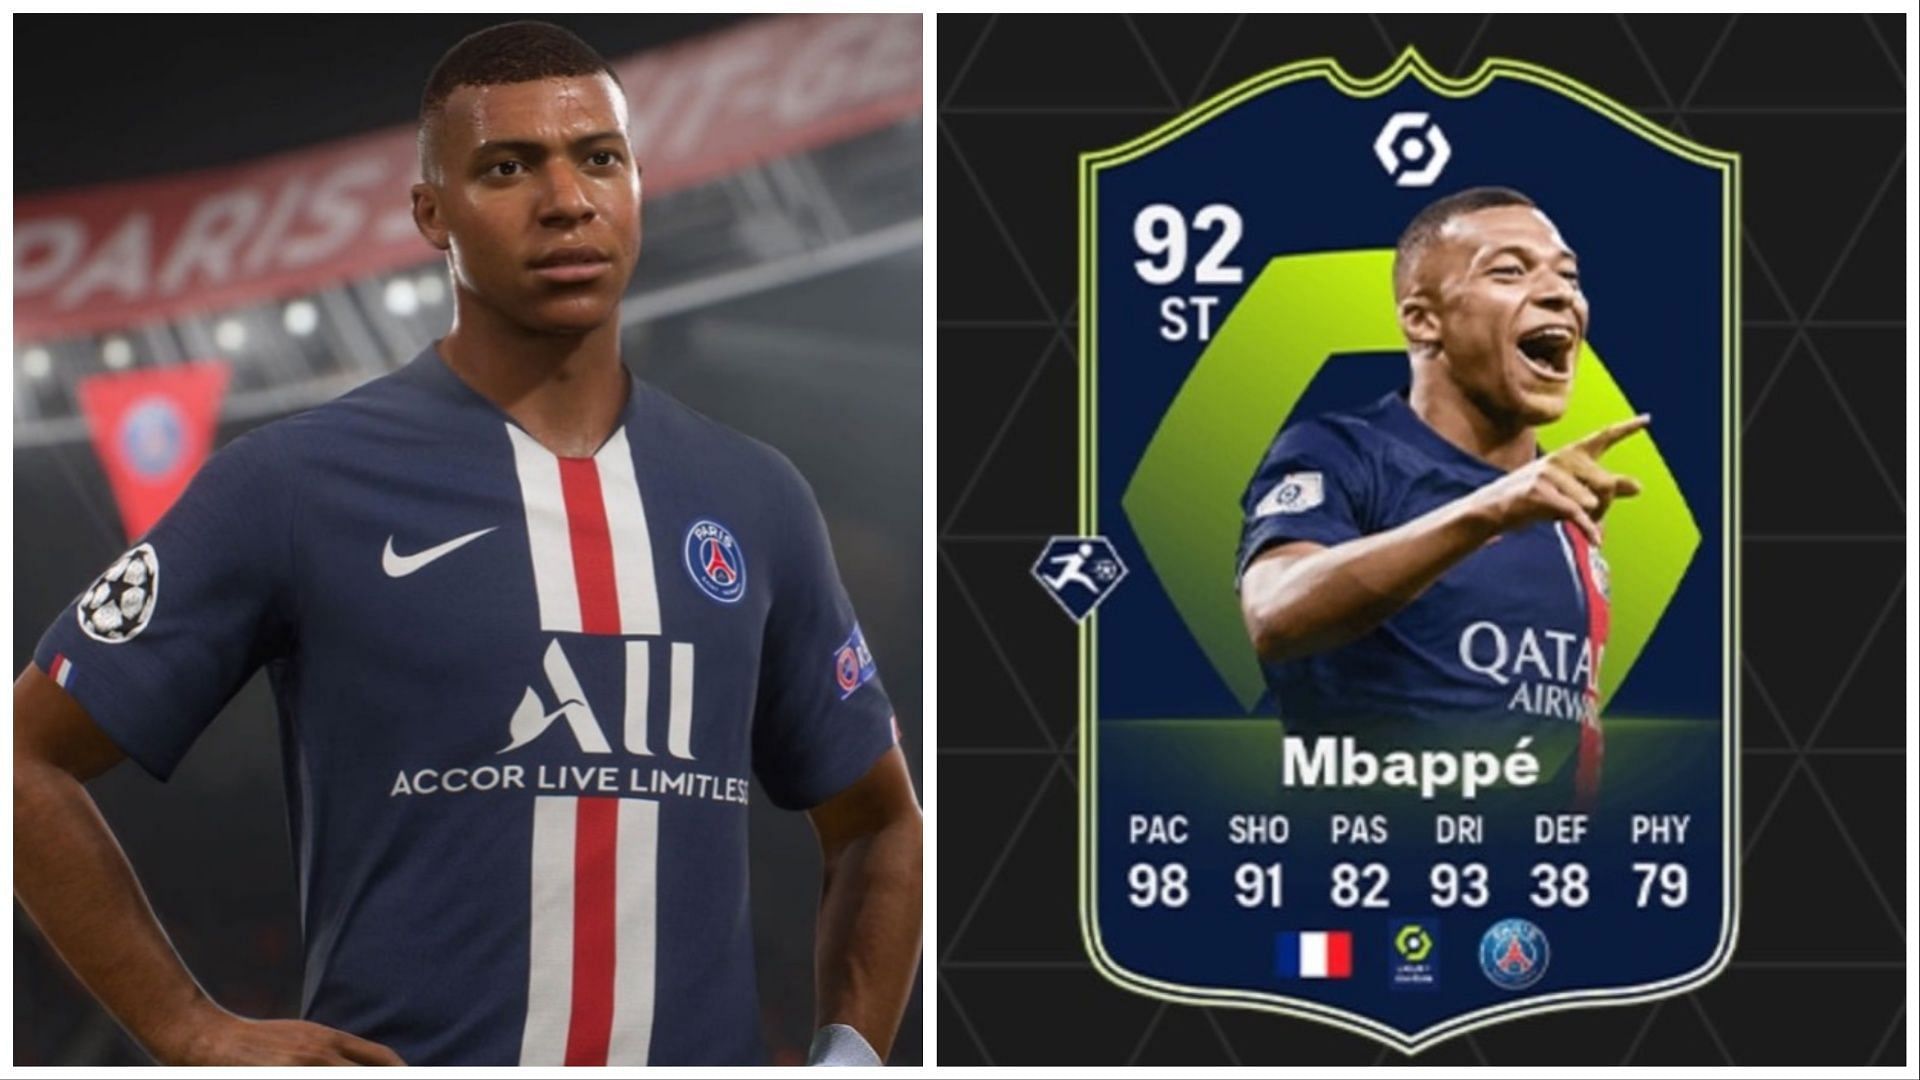 FC 24 POTM Mbappe SBC is COMING TODAY! Yes confirmed by FUT Sheriff we